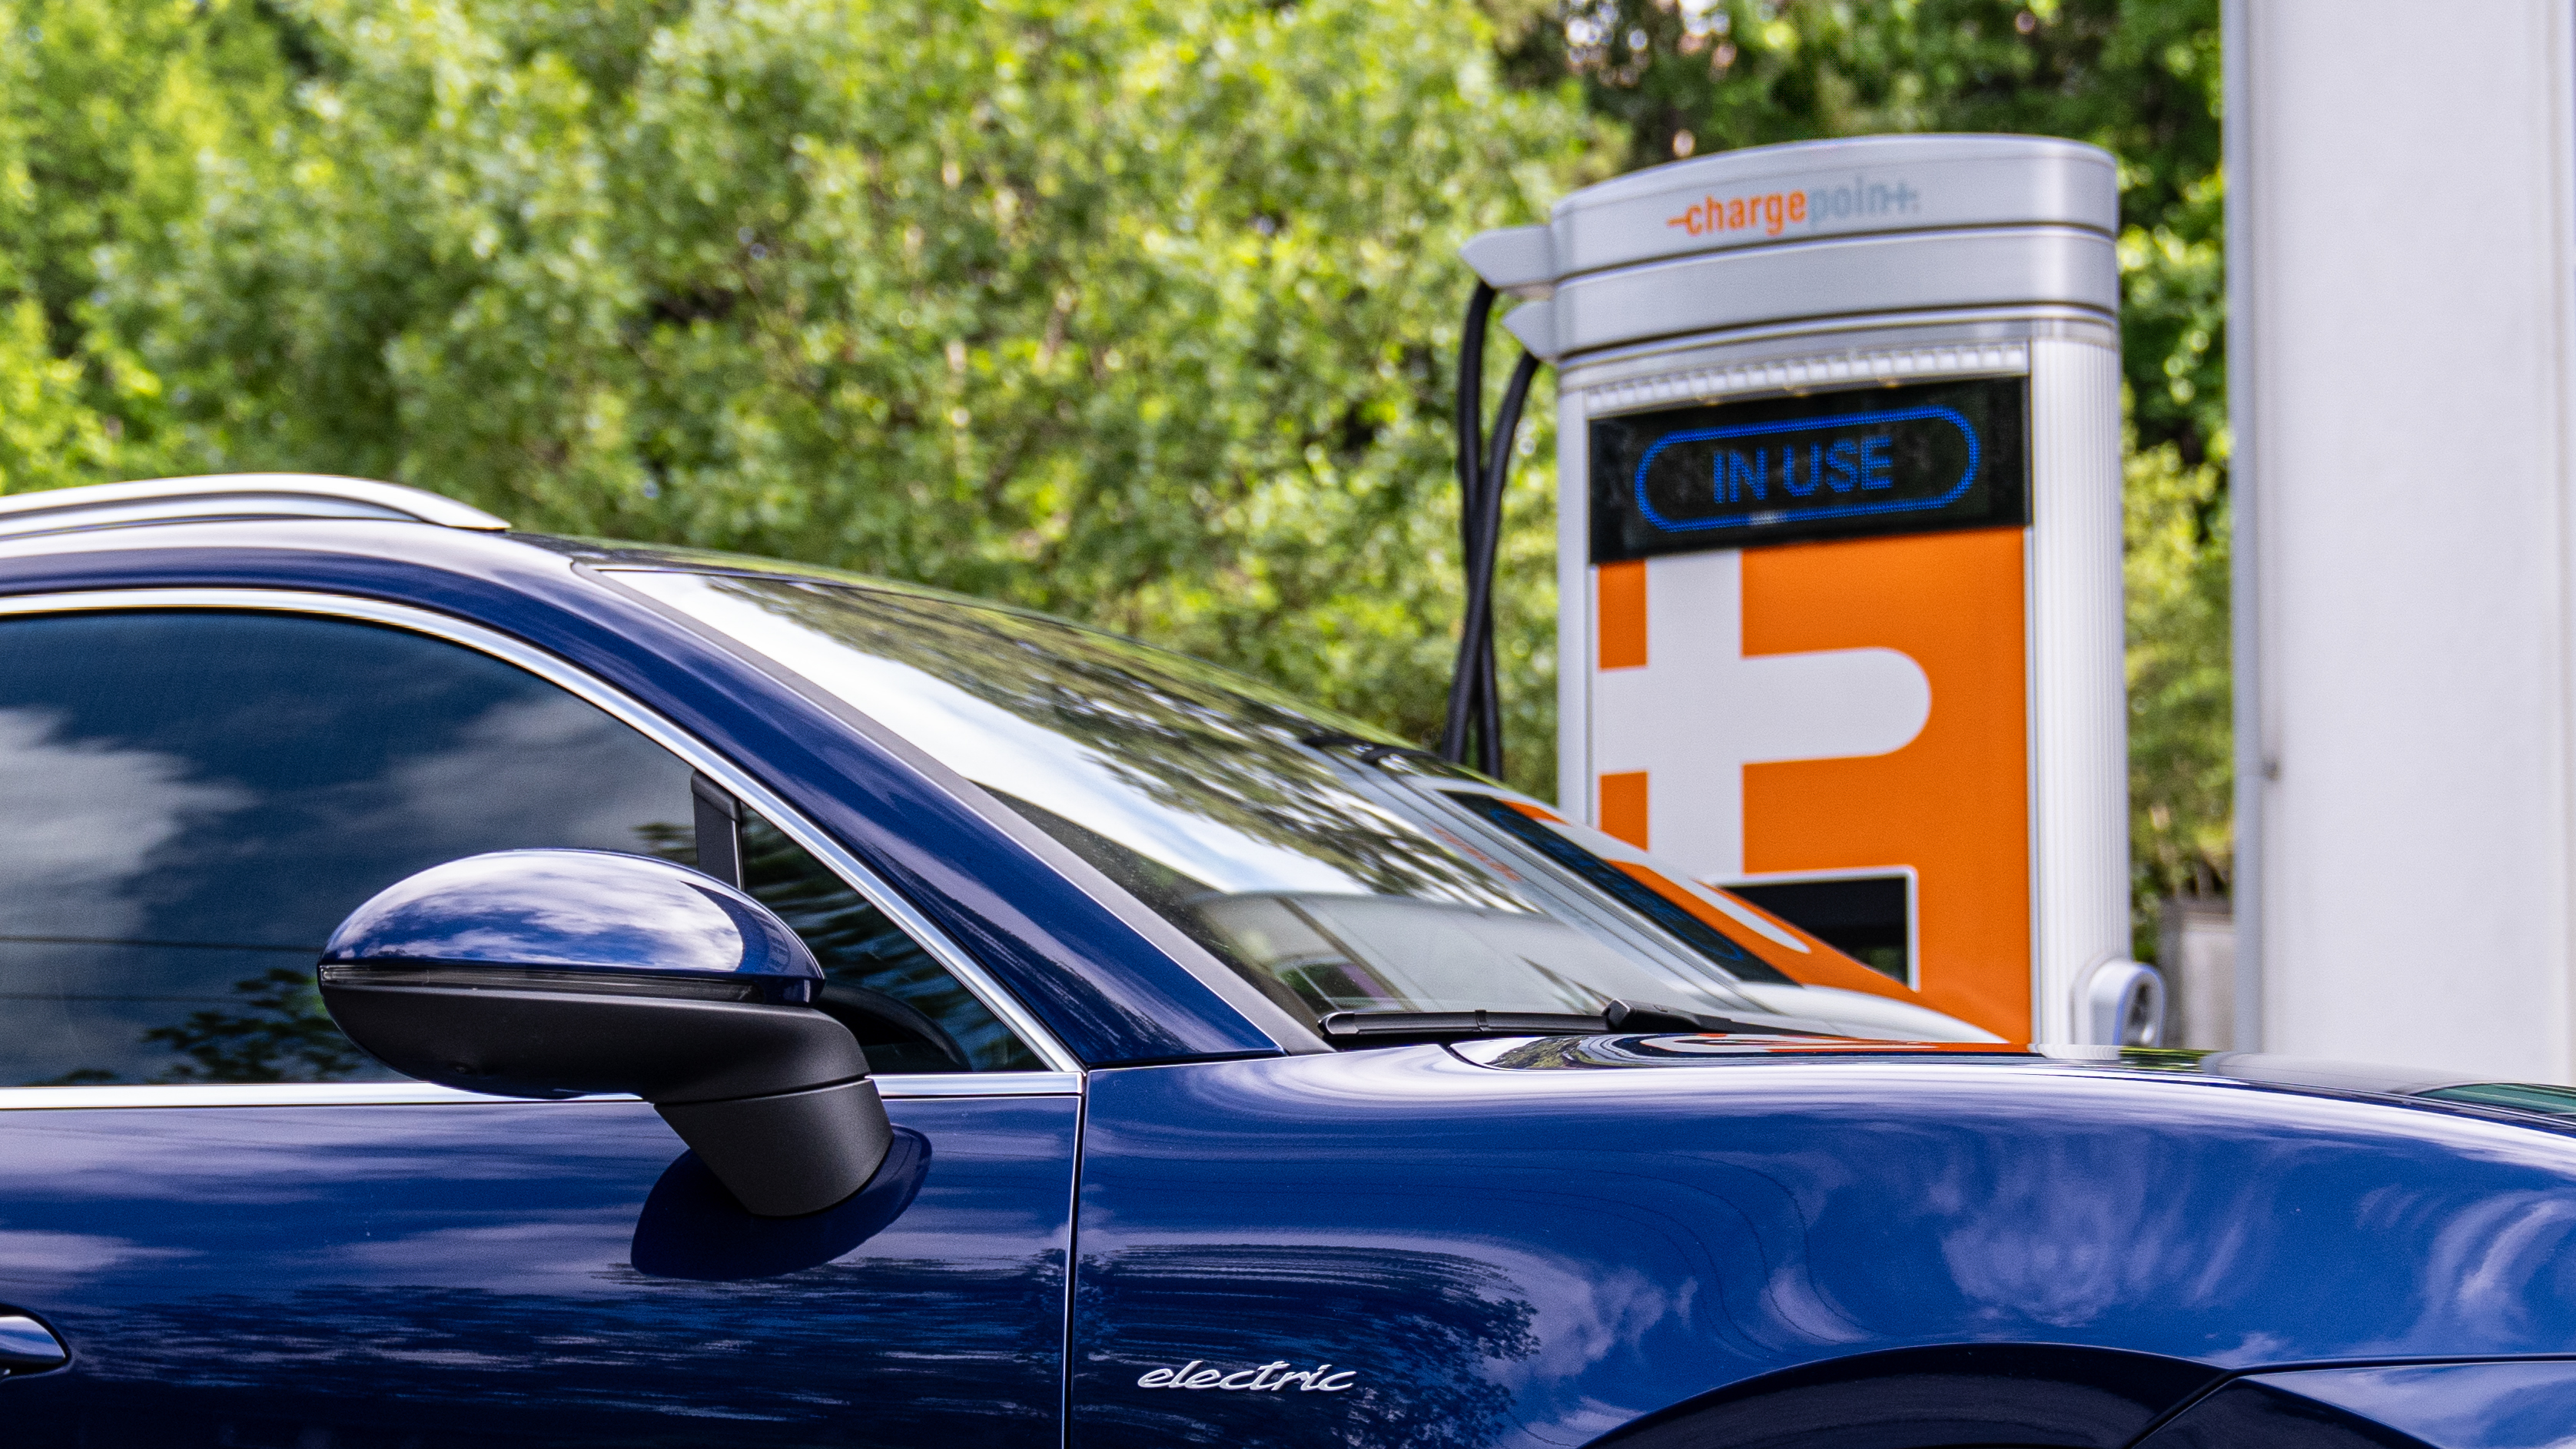 Porsche Cars Canada to integrate ChargePoint into Porsche Charging Service 